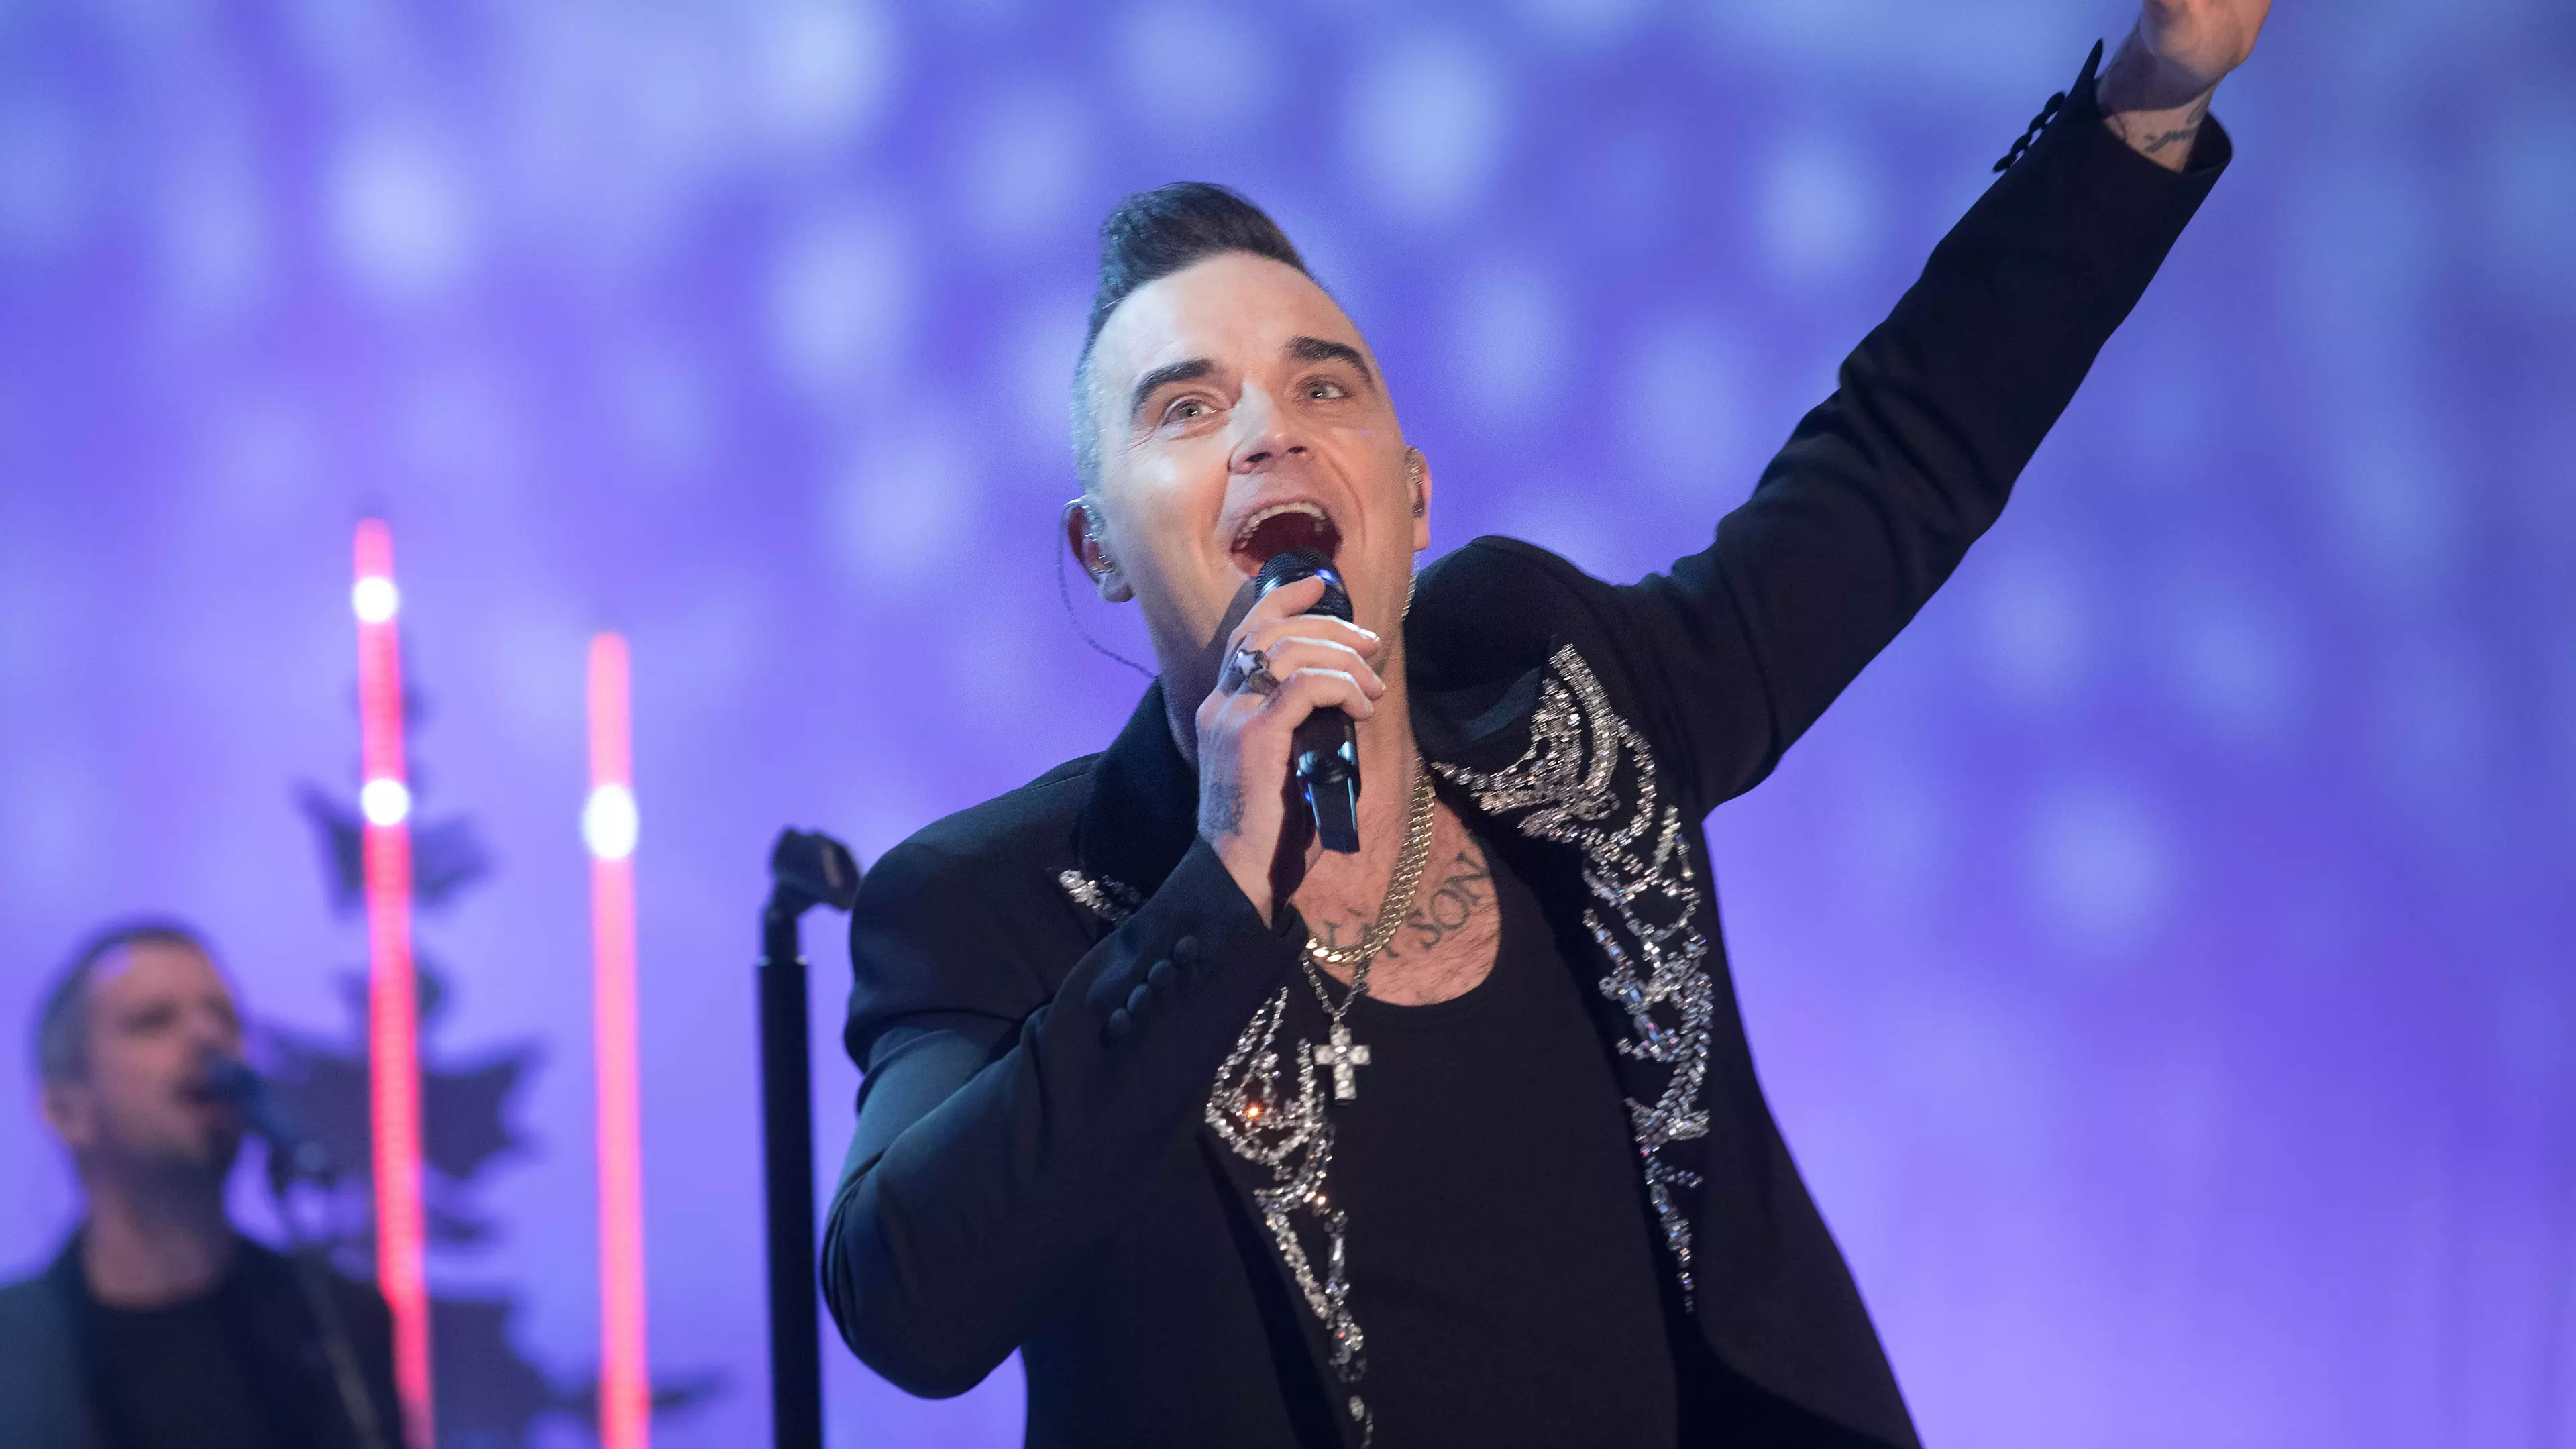 Robbie Williams Is Coming Down Under For A One-Off Special Performance